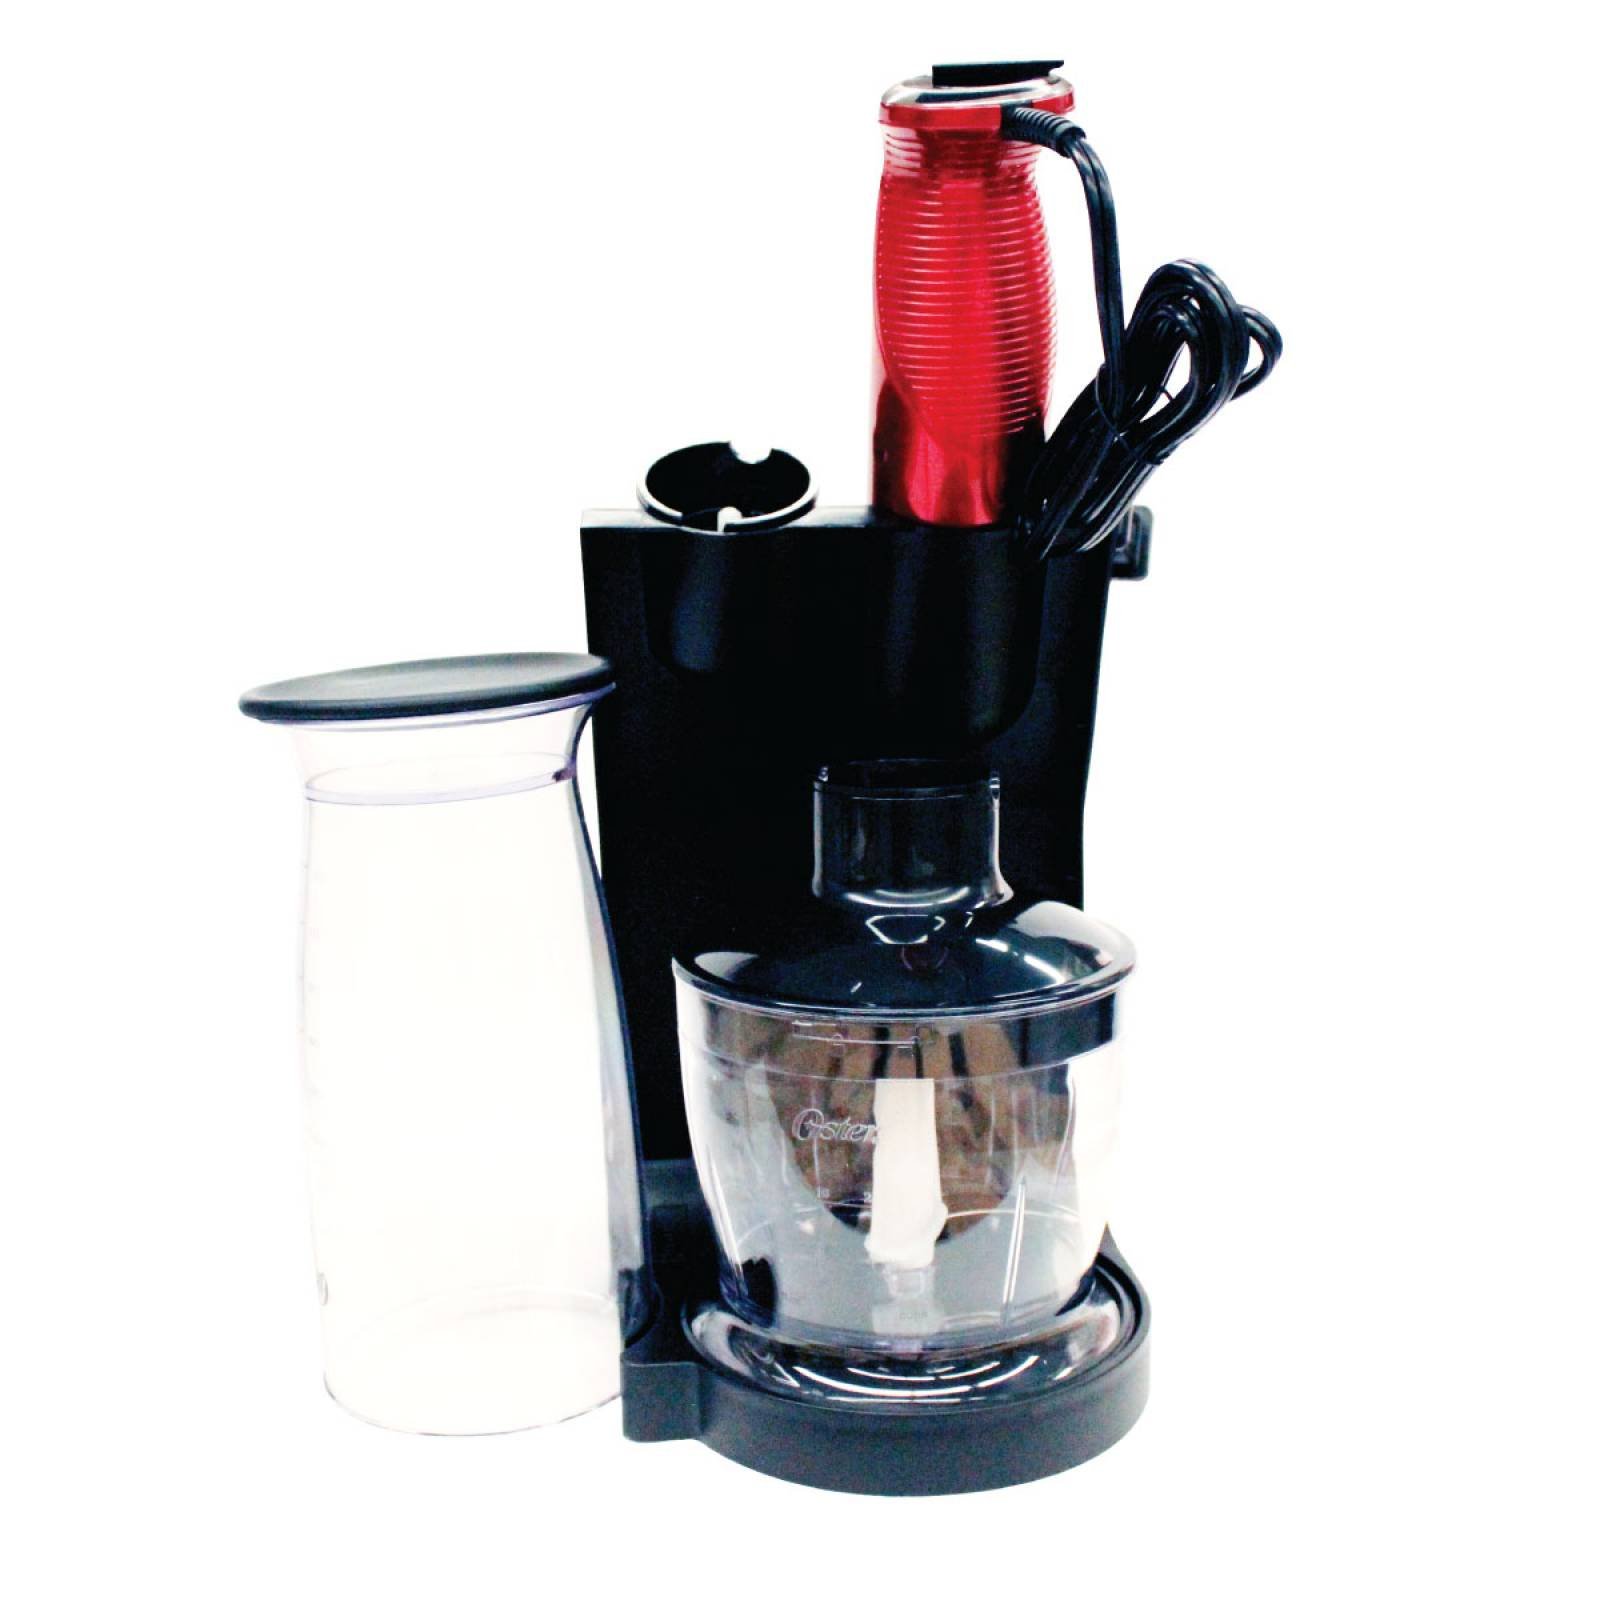 Stick mixer Oster® con accesorios FPSTHB2800 - Oster